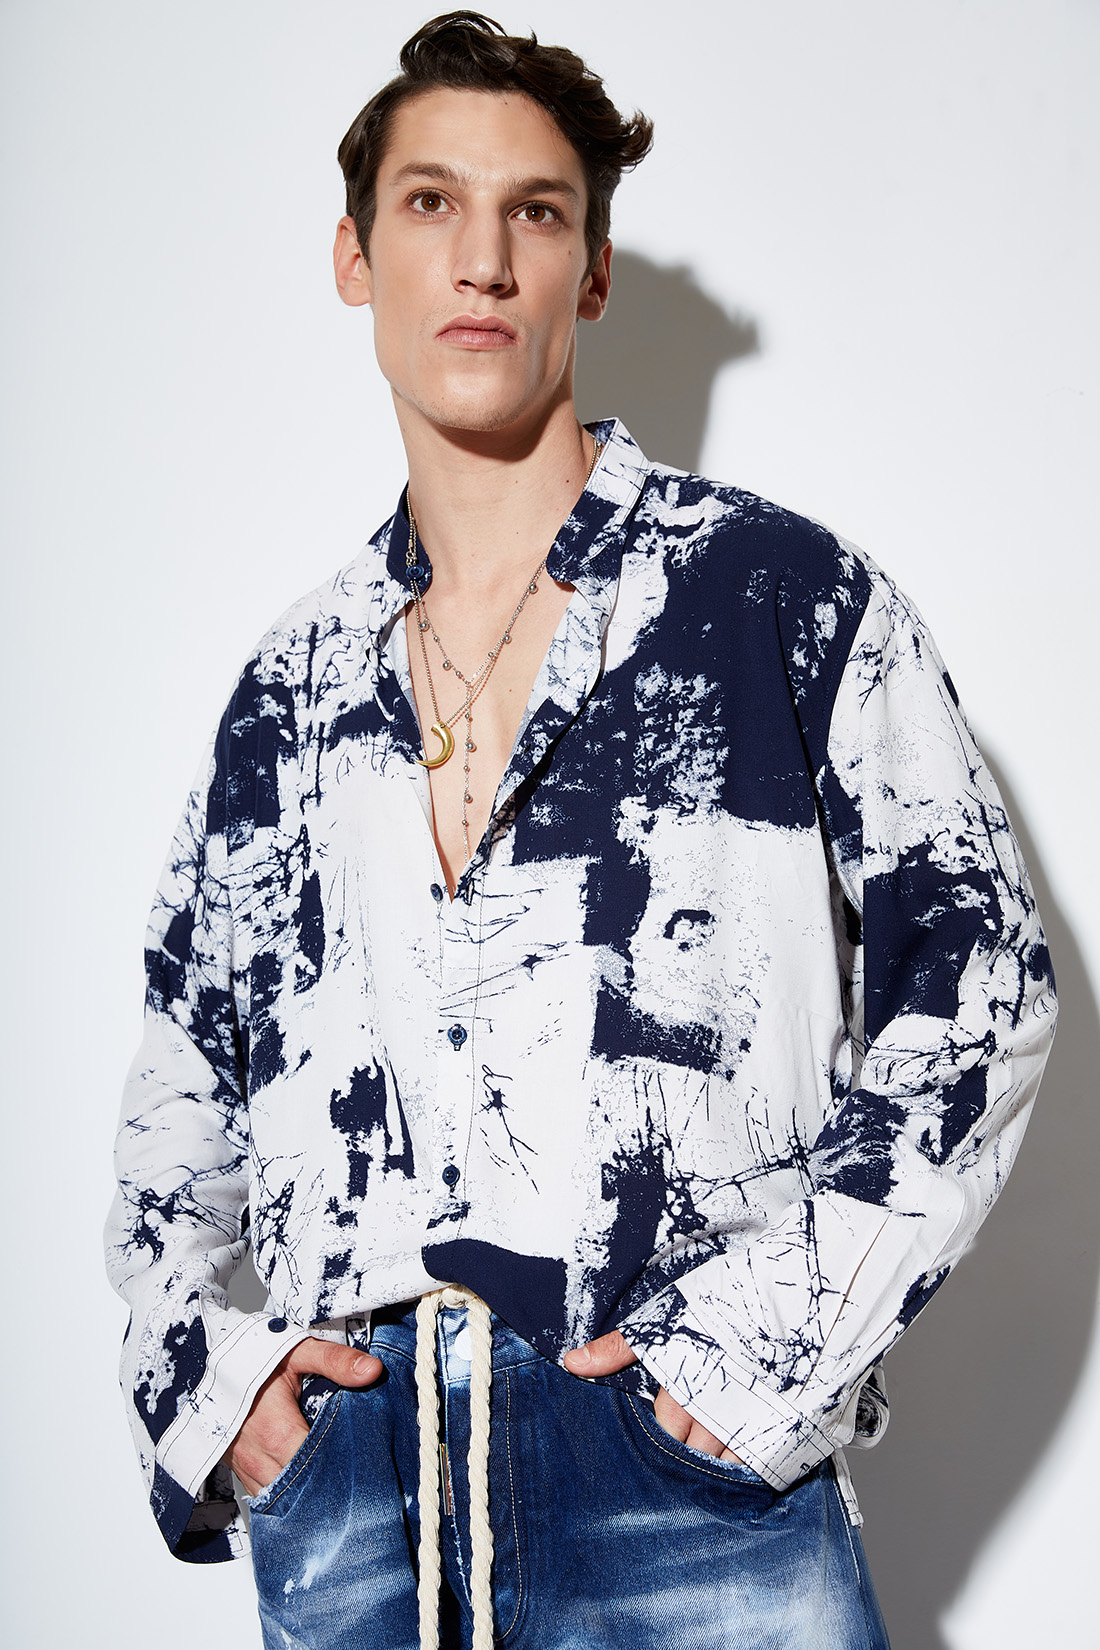 STEFAN ABSTRACT PAINTING STAND UP COLLAR SHIRT